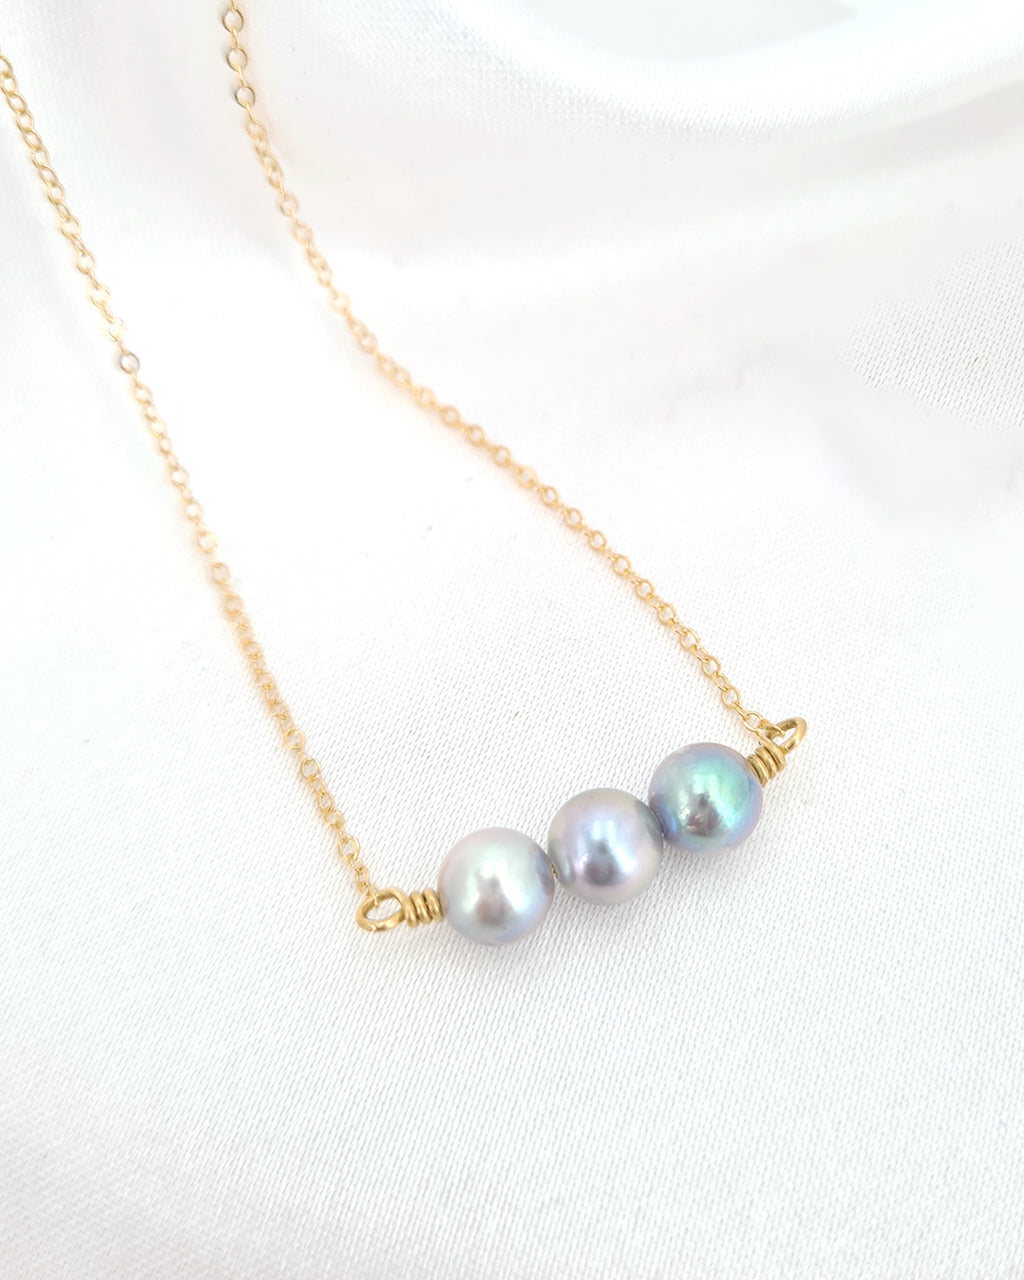 Glimmering Akoya Silver-Blue Pearl Trio Necklace | Handmade Akoya Pearl Jewelry | Something Blue for Brides in Wedding 